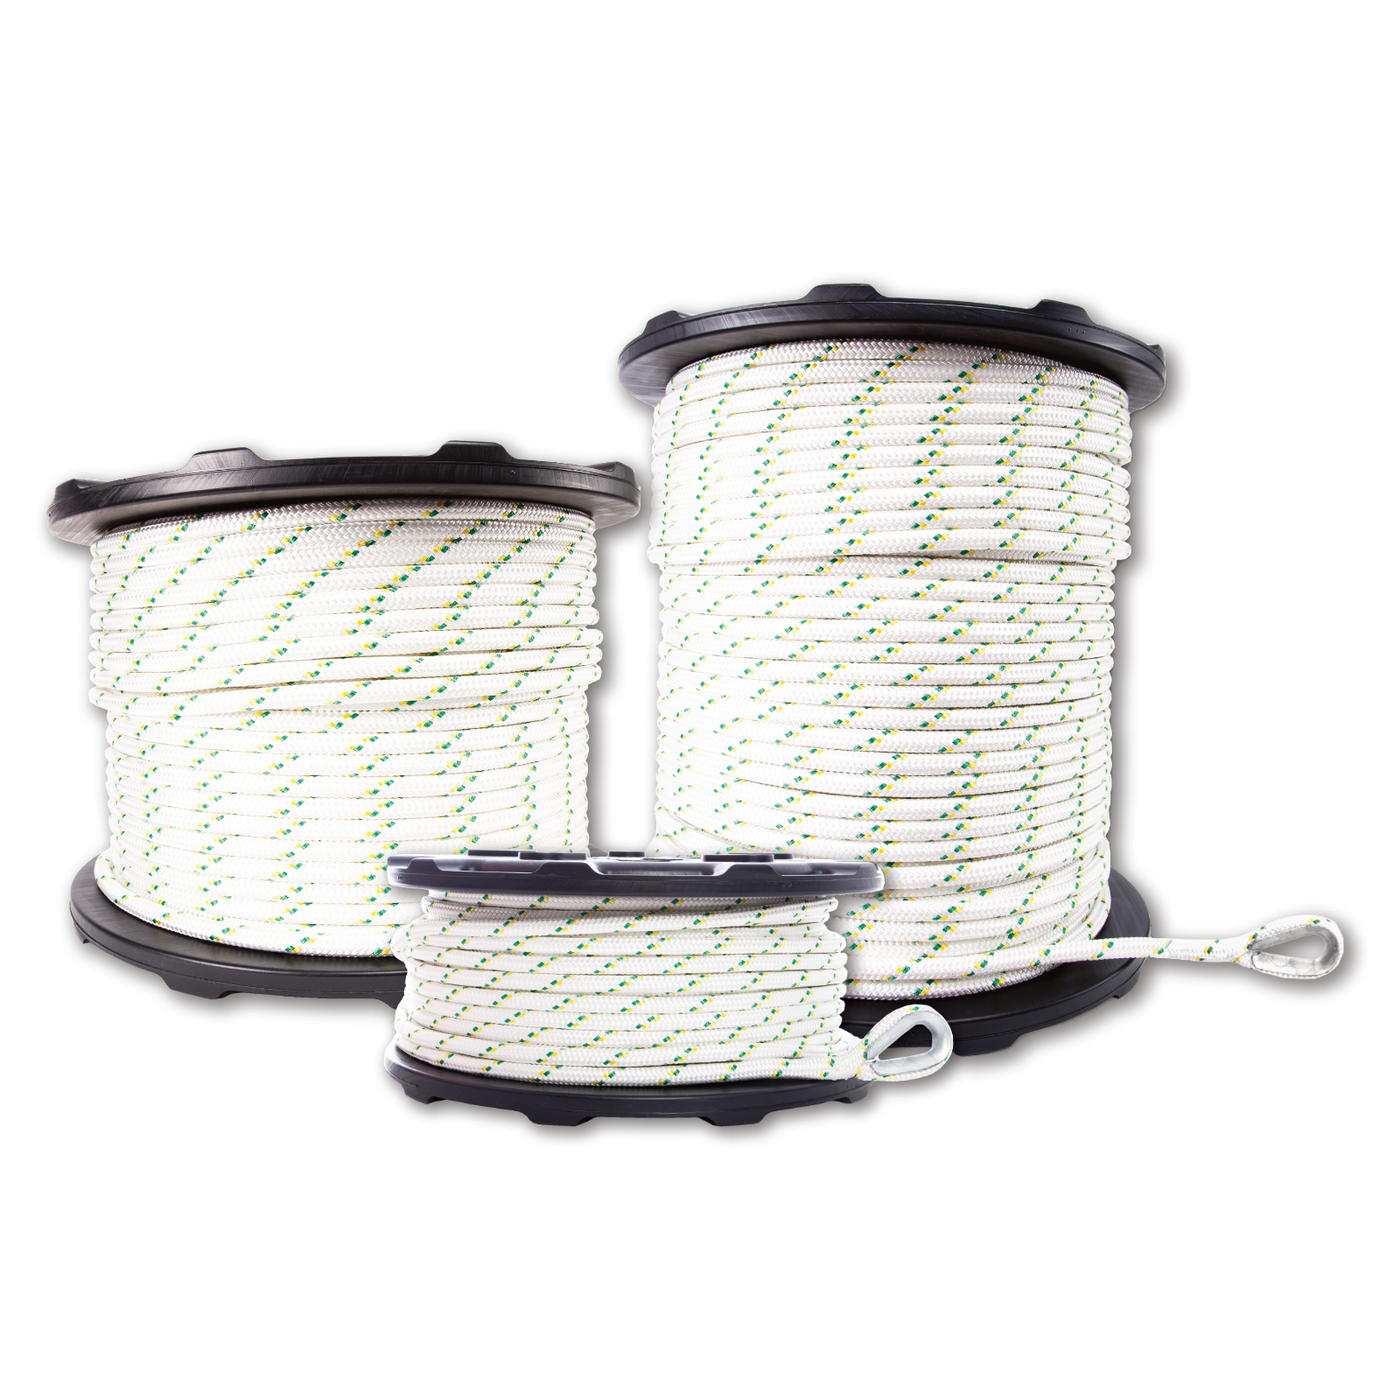 Ø 12mm Double-braided polyester ropes with splices and thimbles